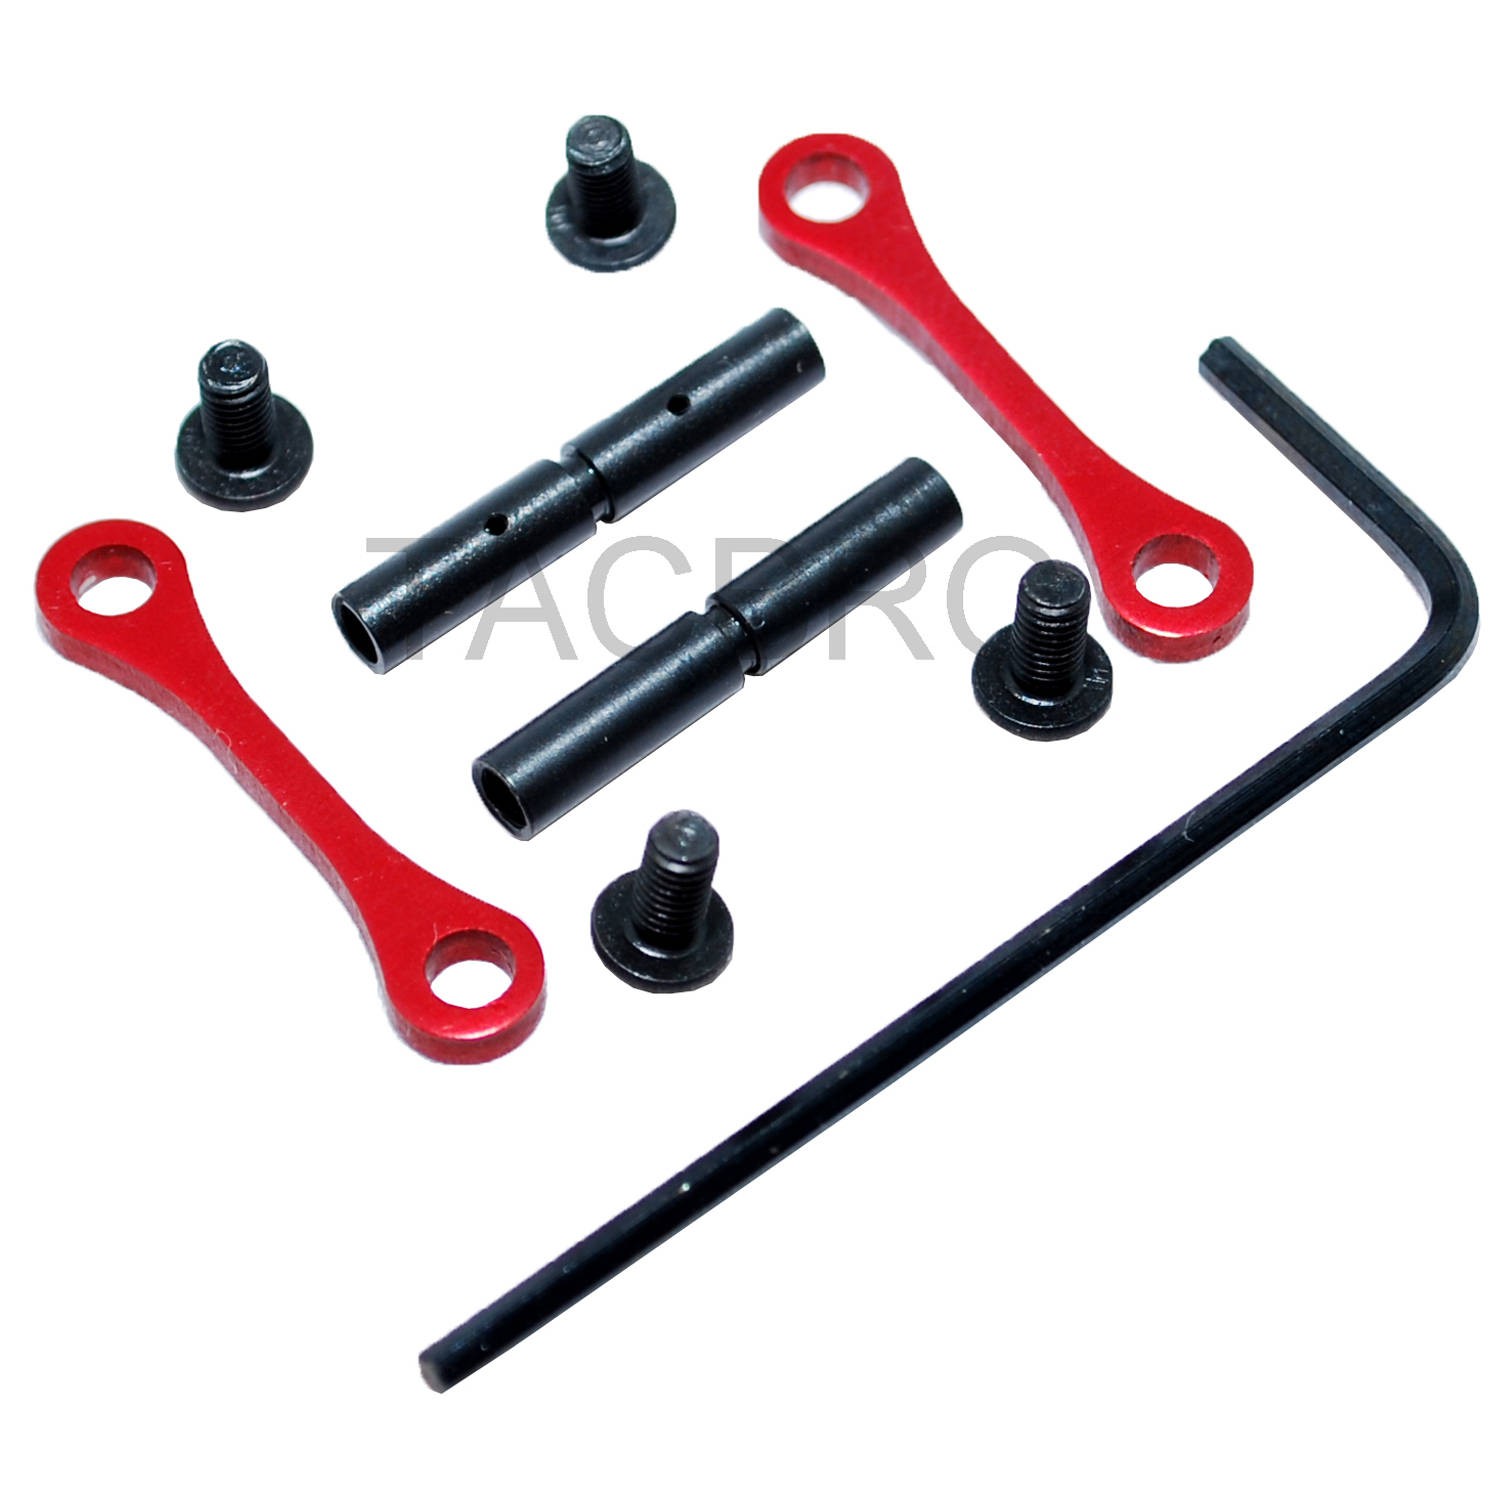 Anodized Red Complete Anti Walk Rotation Pins Kit Set .154 for .223 .308